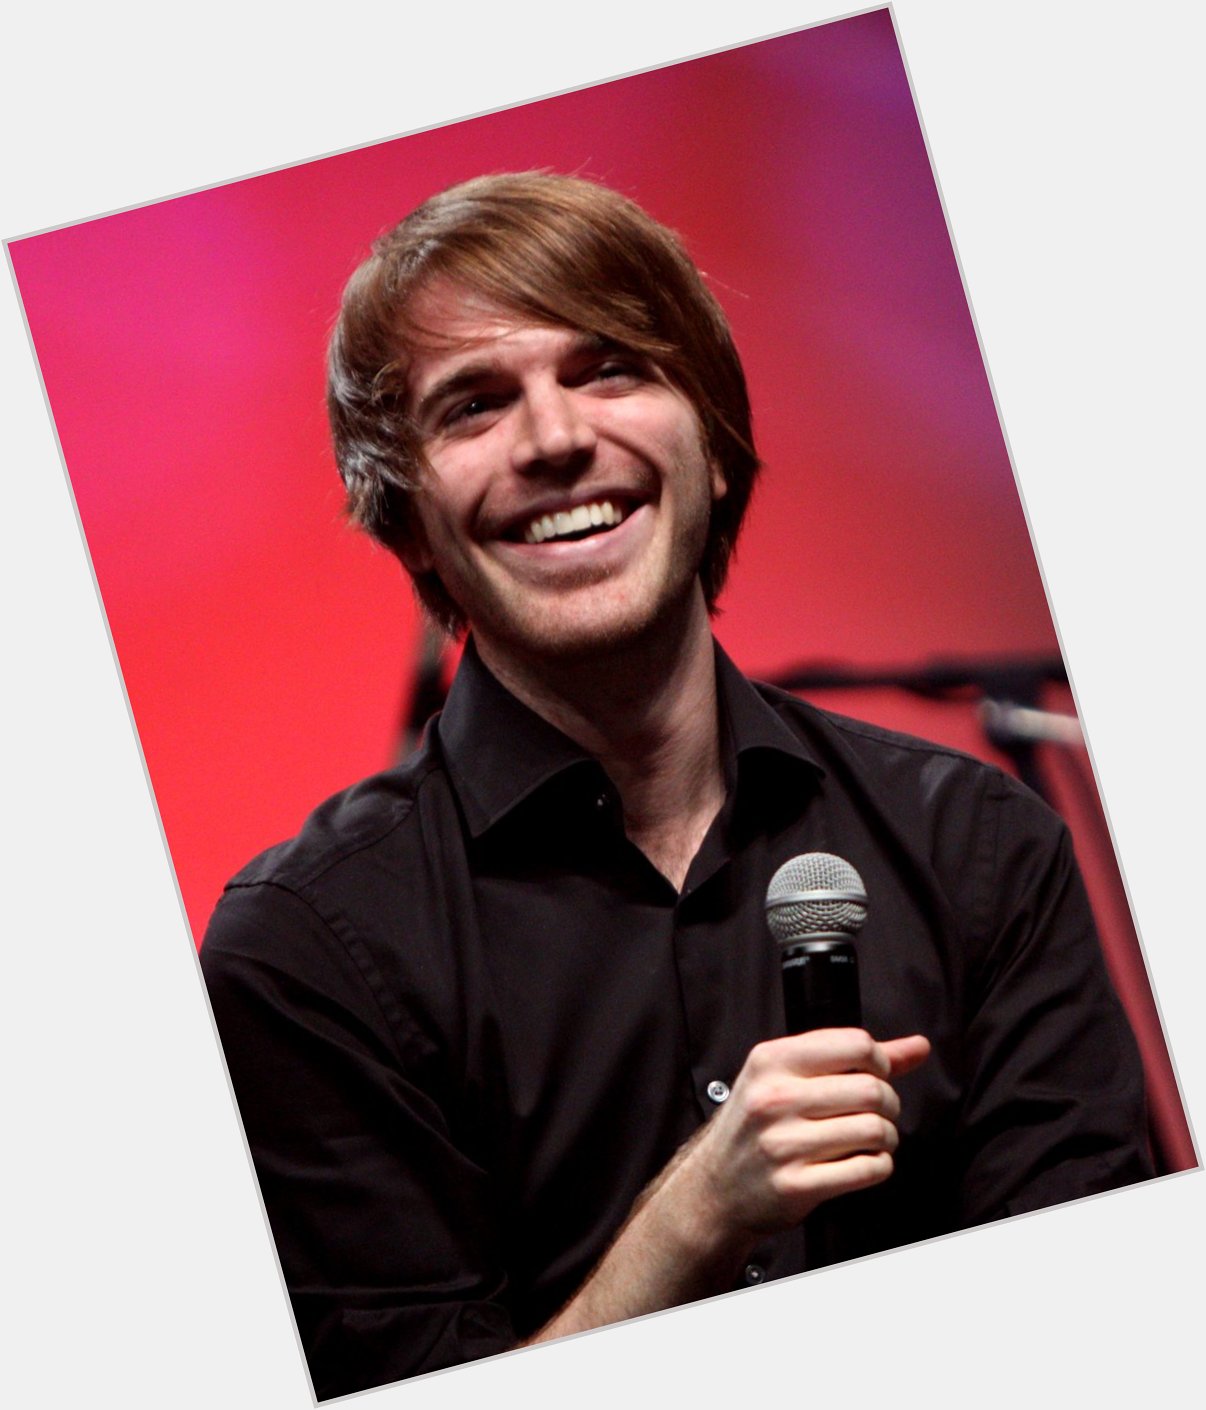 Happy 30th Birthday to YouTuber and actor, Shane Dawson! 